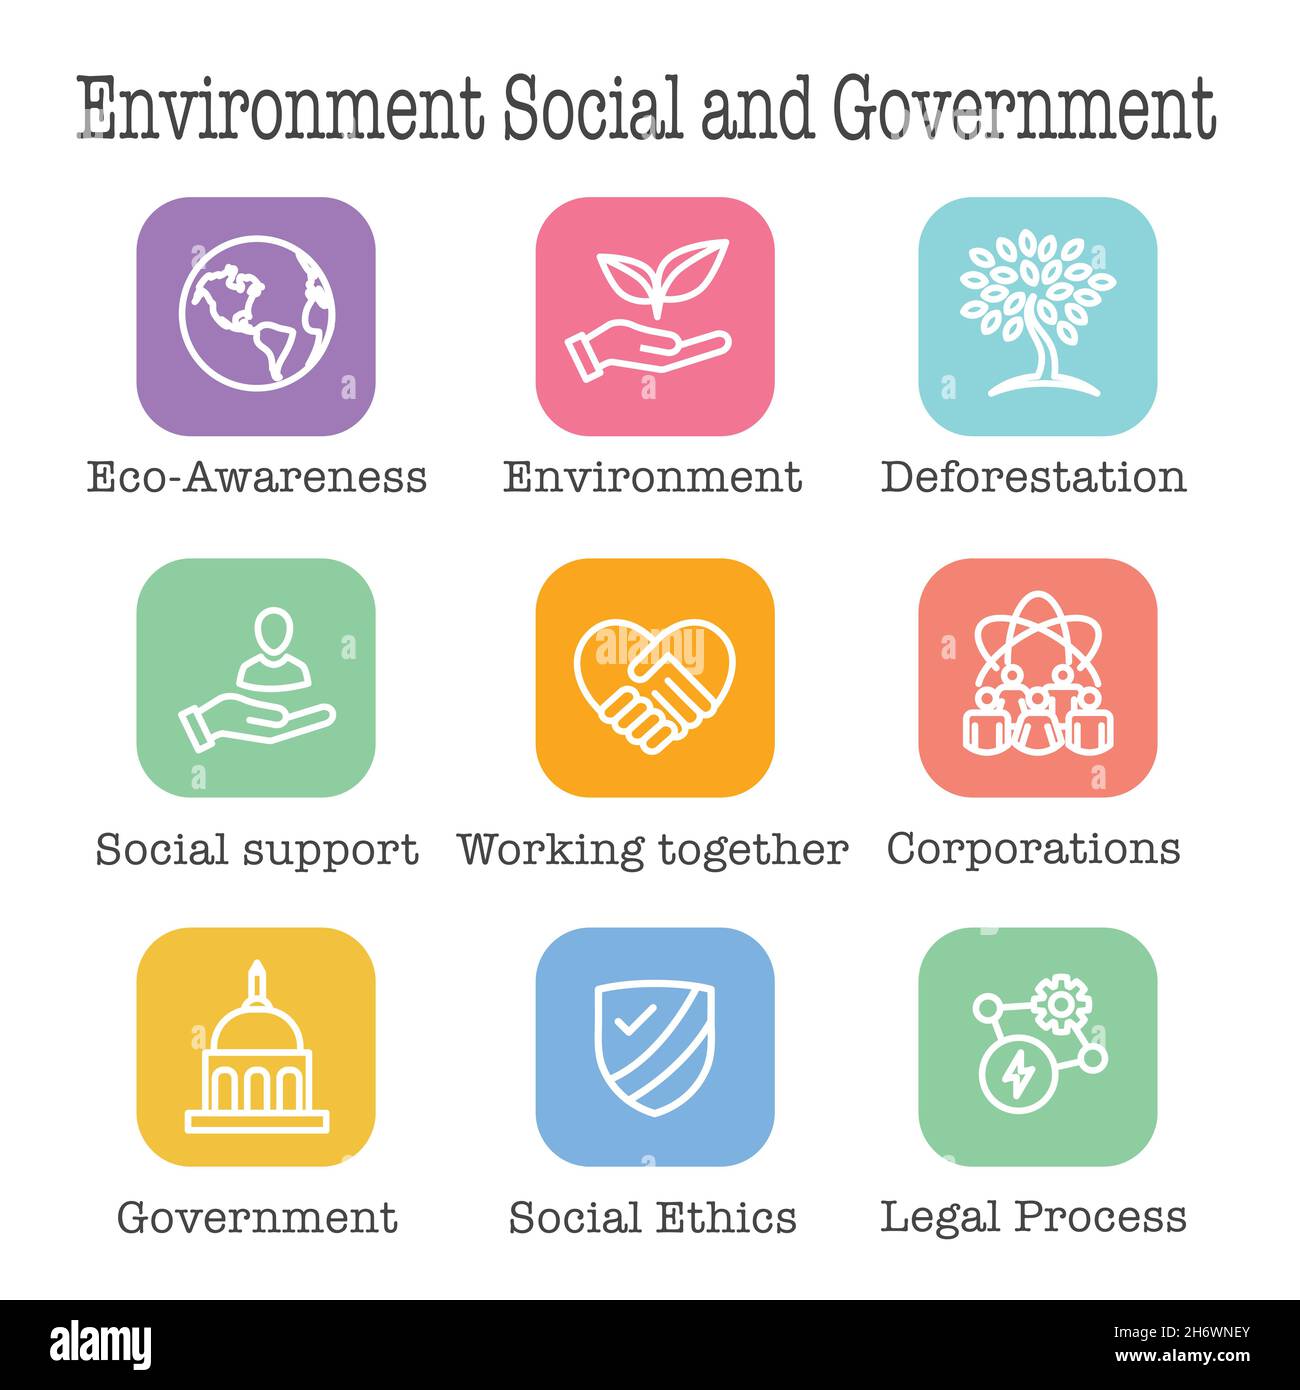 Environment or Environmental and Social Government with Governance Icon Set for ESG Stock Vector